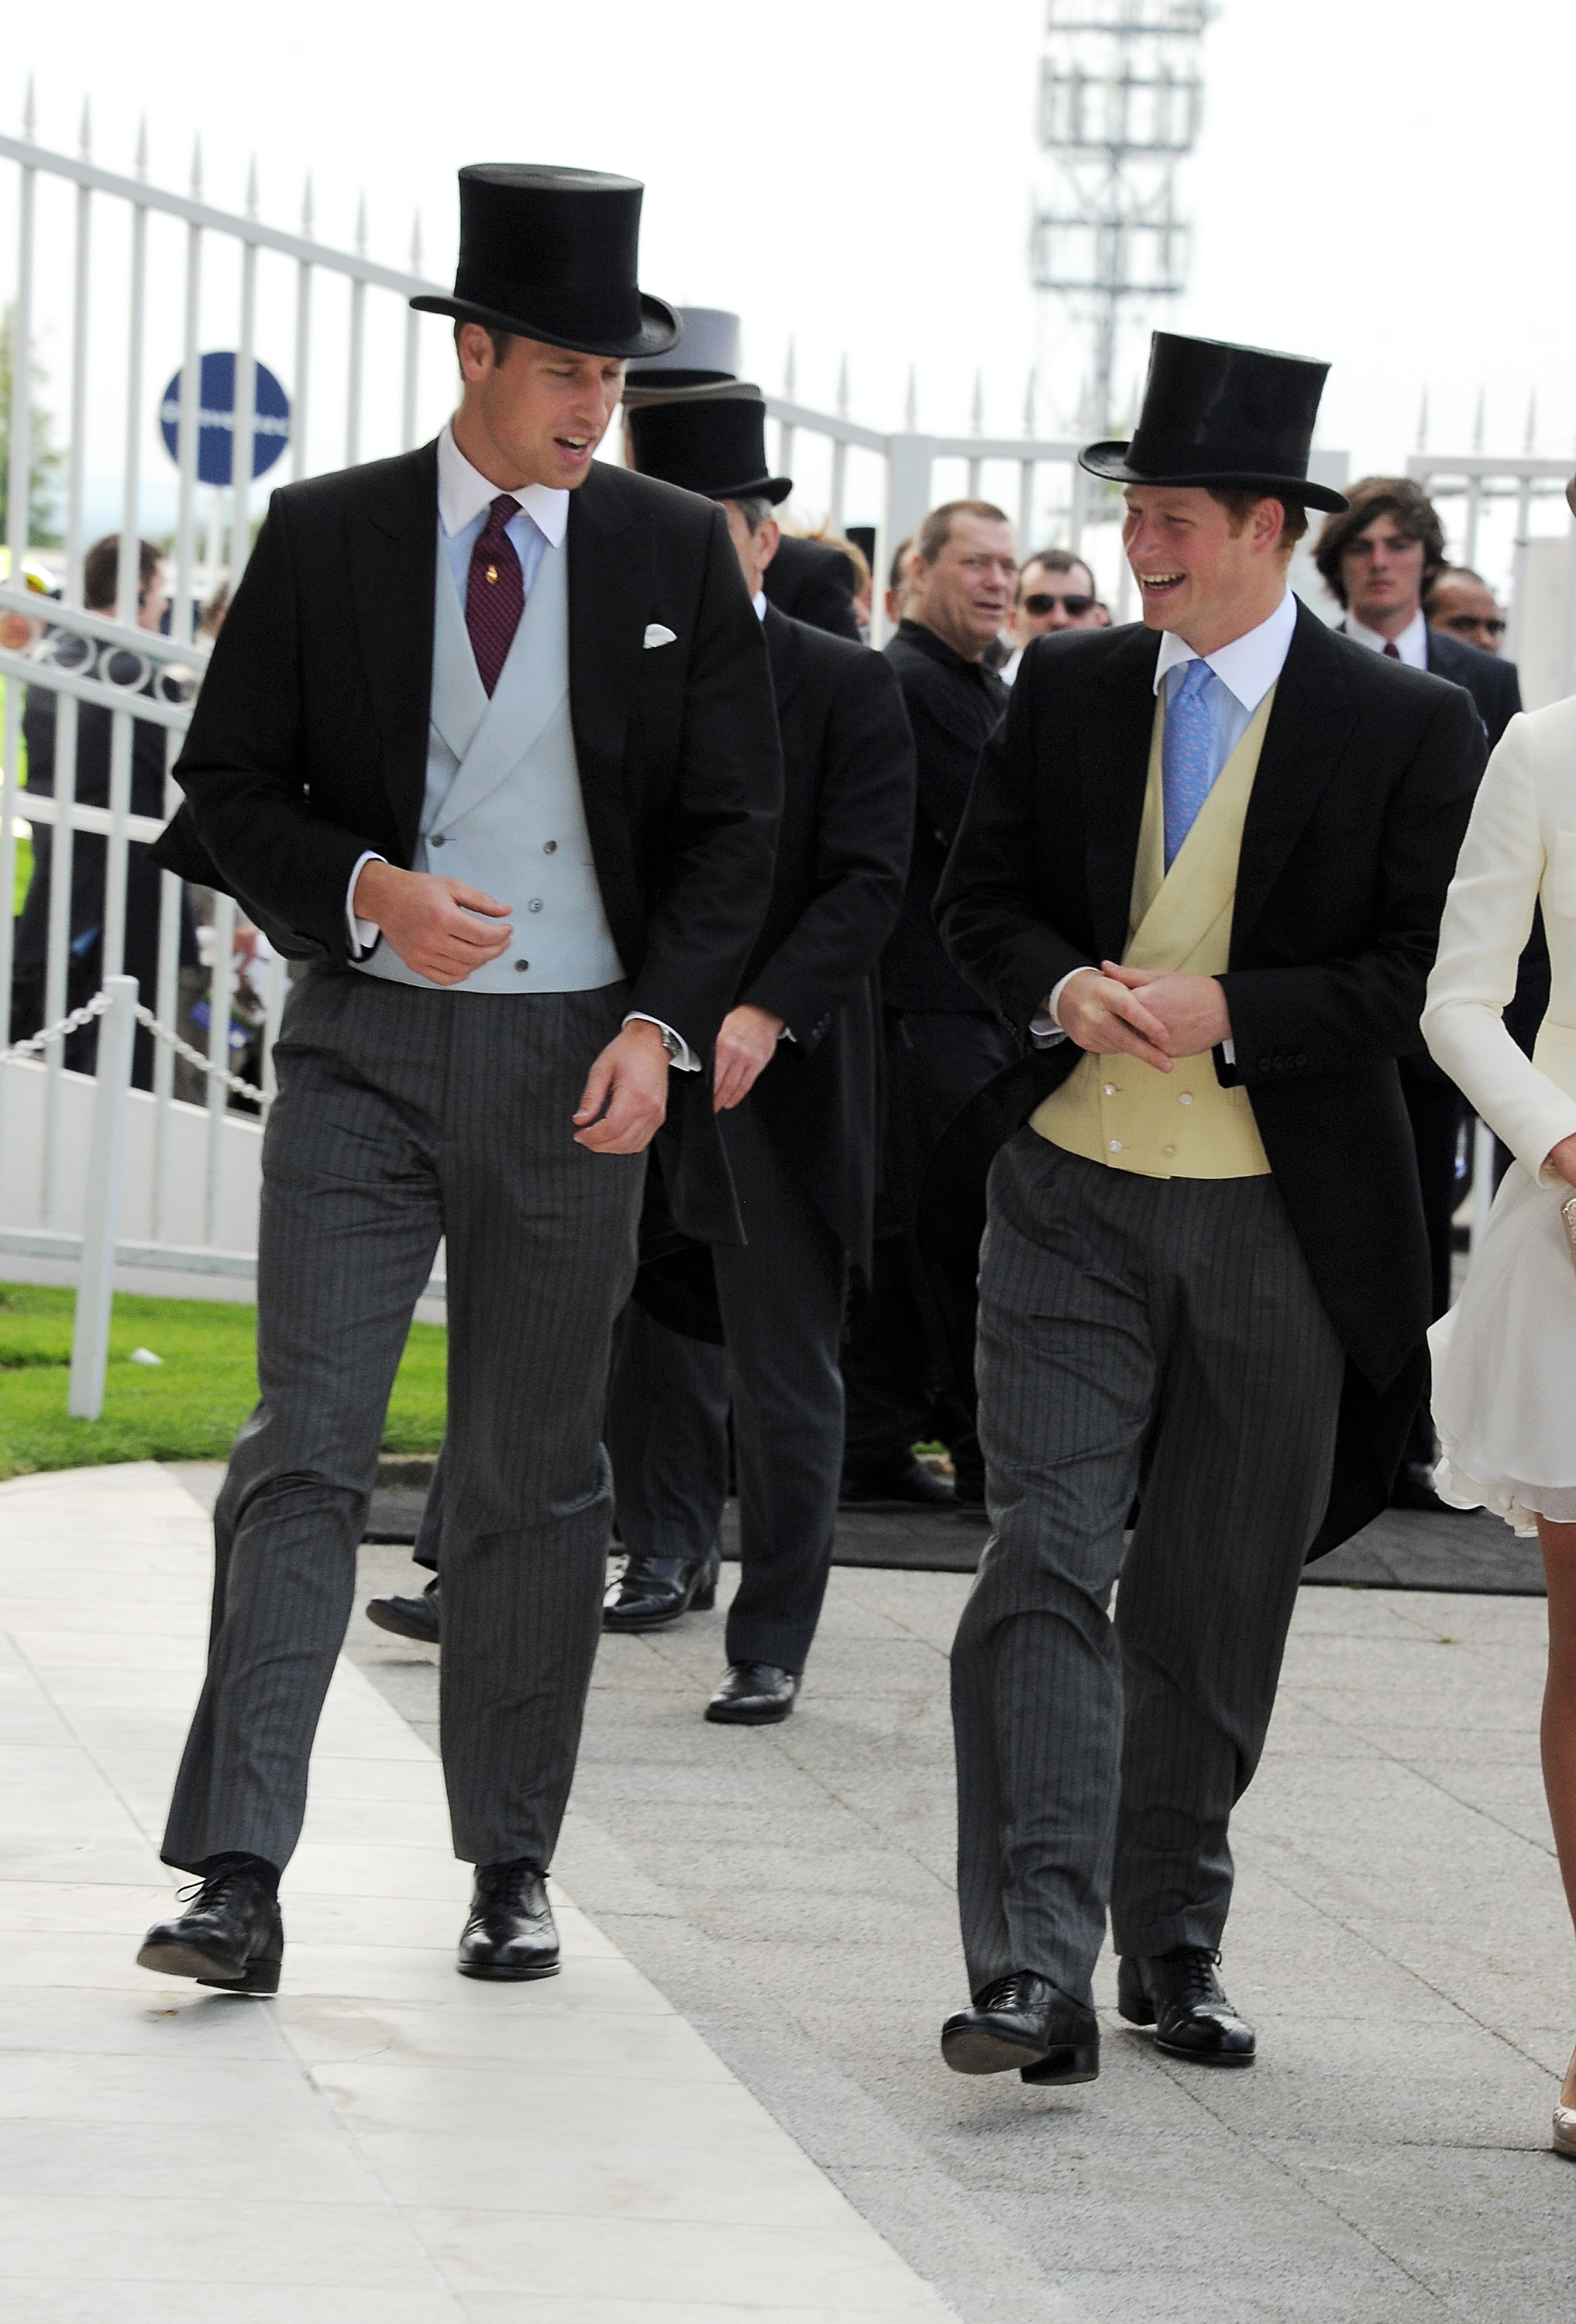 Prince William, Duke of Cambridge (L) and Prince Harry attend Investec Derby Day at the Investec Derby Festival at Epsom Downs Racecourse on June 4, 2011 in Epsom, England. (Dave M. Benett—Getty Images)